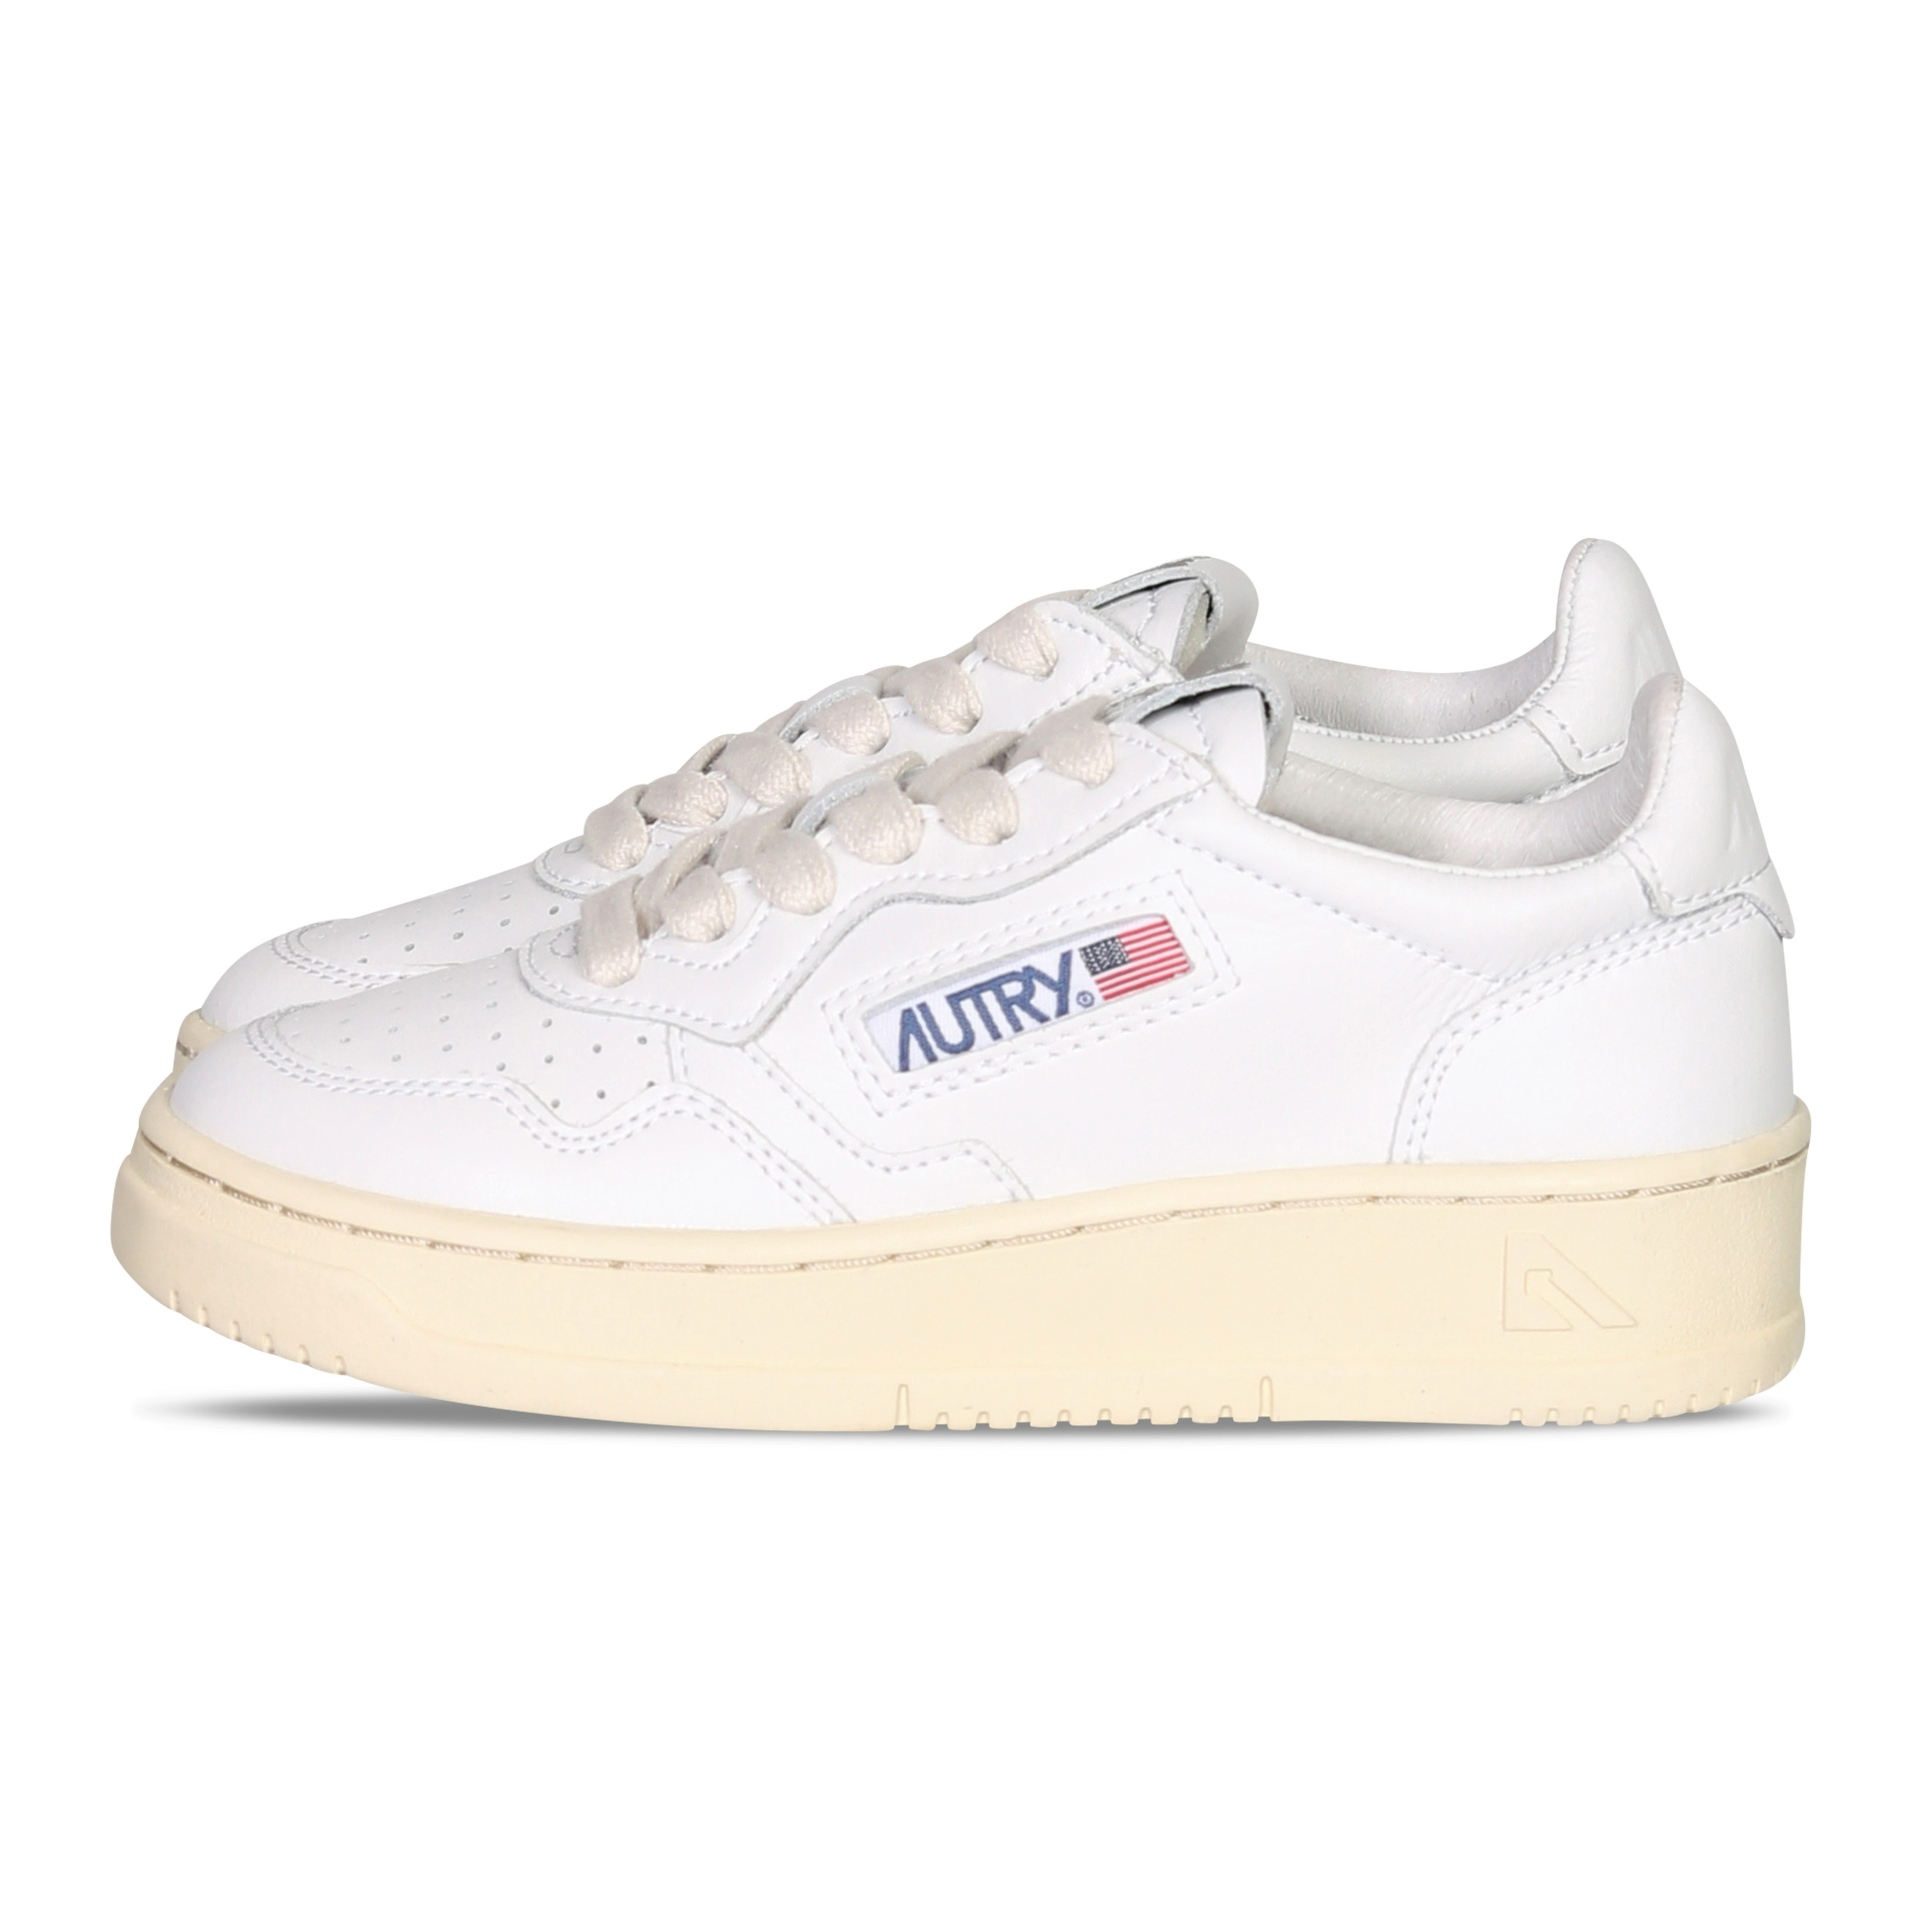 -KIDS- AUTRY ACTION SHOES Low Sneaker in White Draw Action People 29